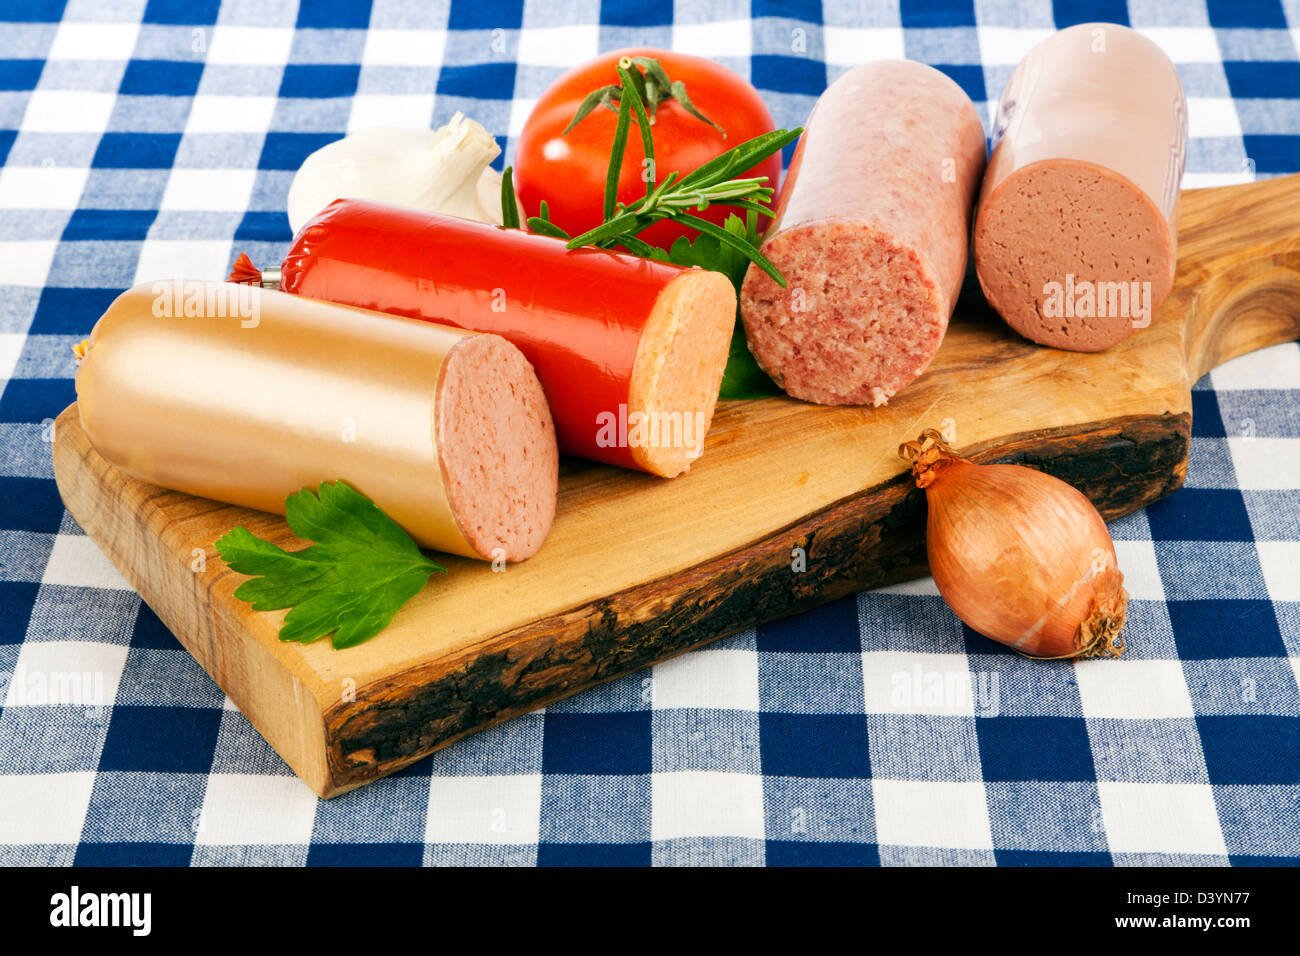 Assortment of german sausages on wooden platter Stock Photo